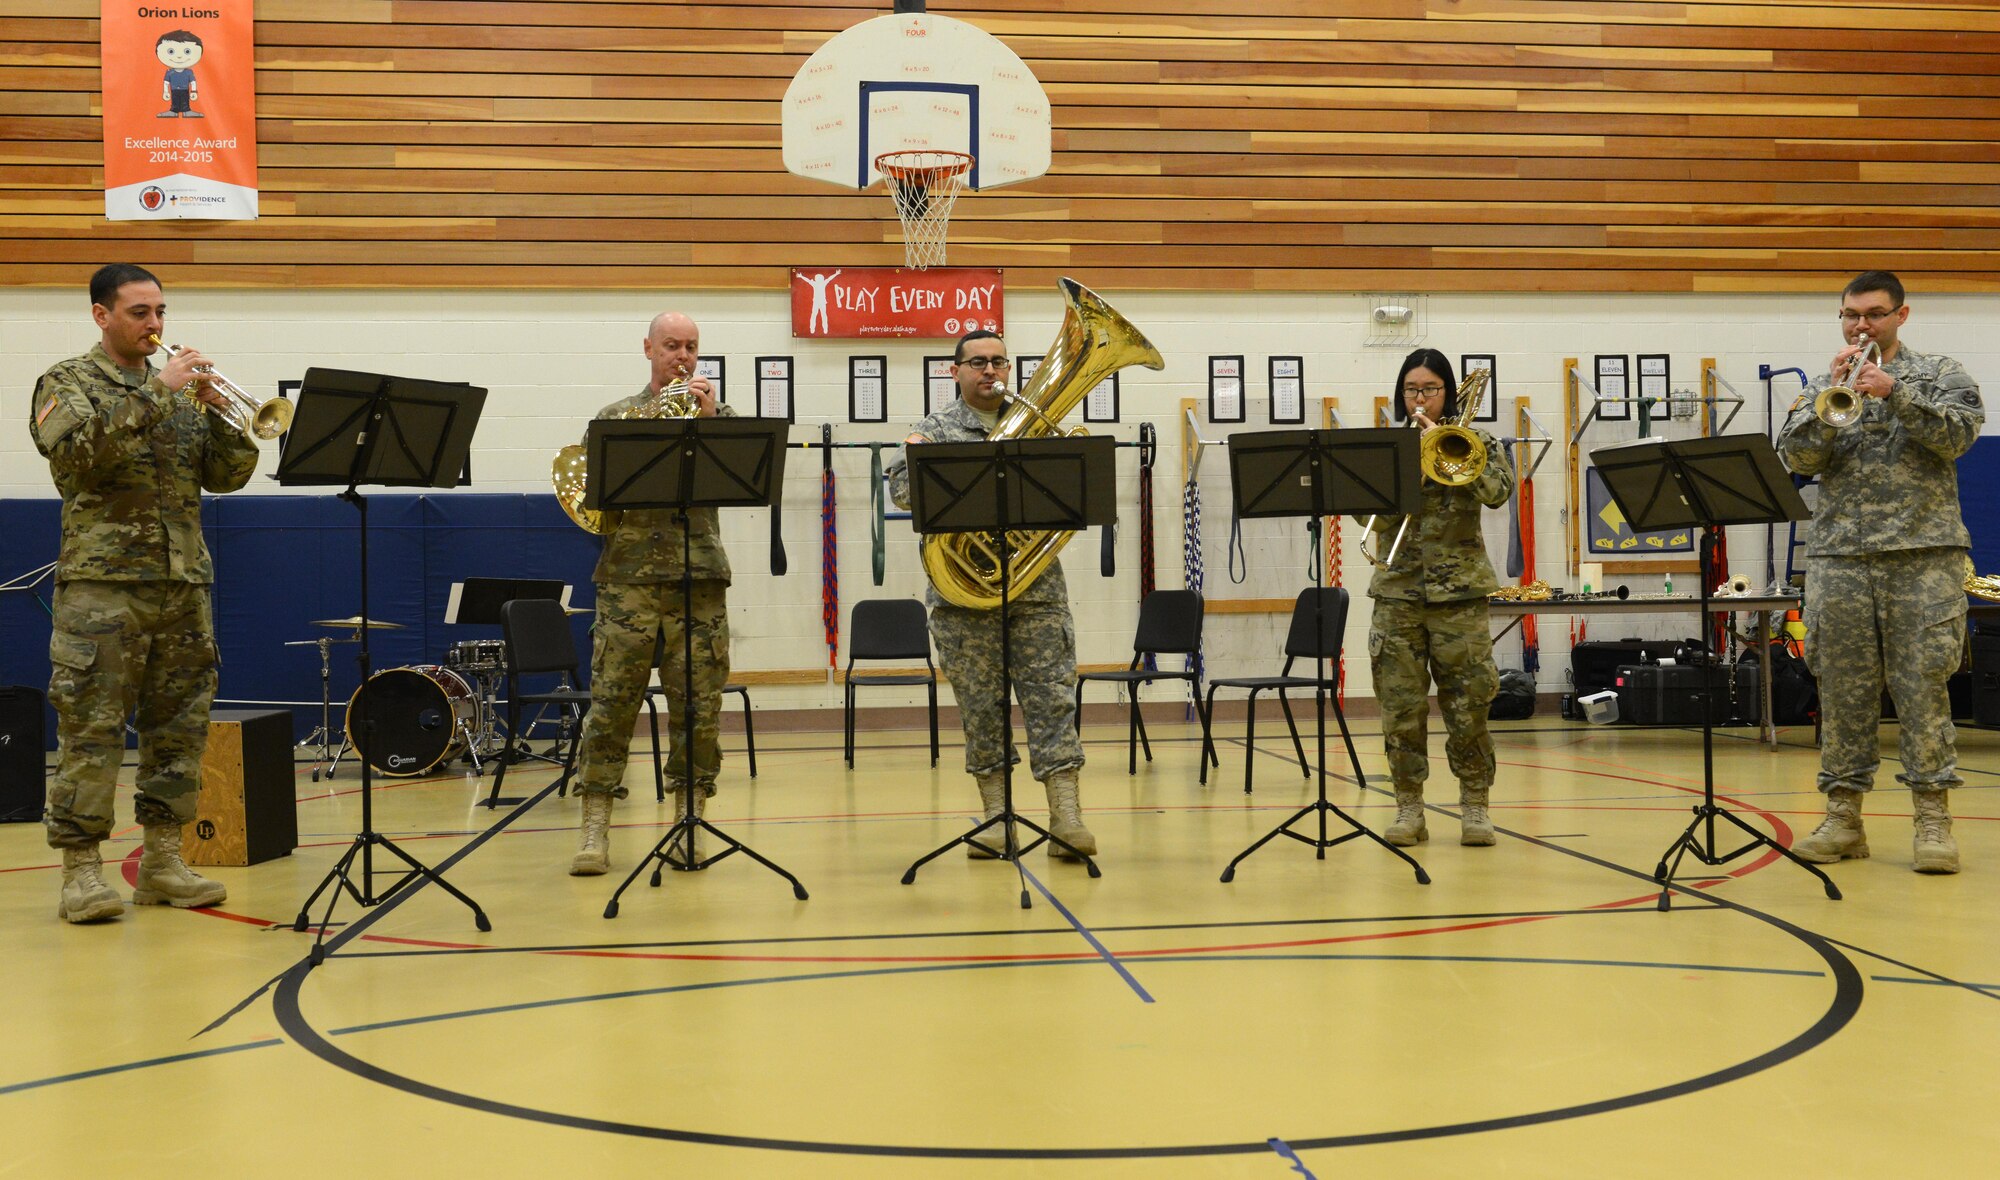 The 9th Army Band group ‘Frigid Brass’ performs for the children of Orion Elementary School, Joint Base Elmendorf-Richardson, Alaska, Feb. 21, 2017. ‘Frigid Brass’ performed many different genres of music and taught the children the first steps in playing each instrument to spark an interest in the musical arts. 